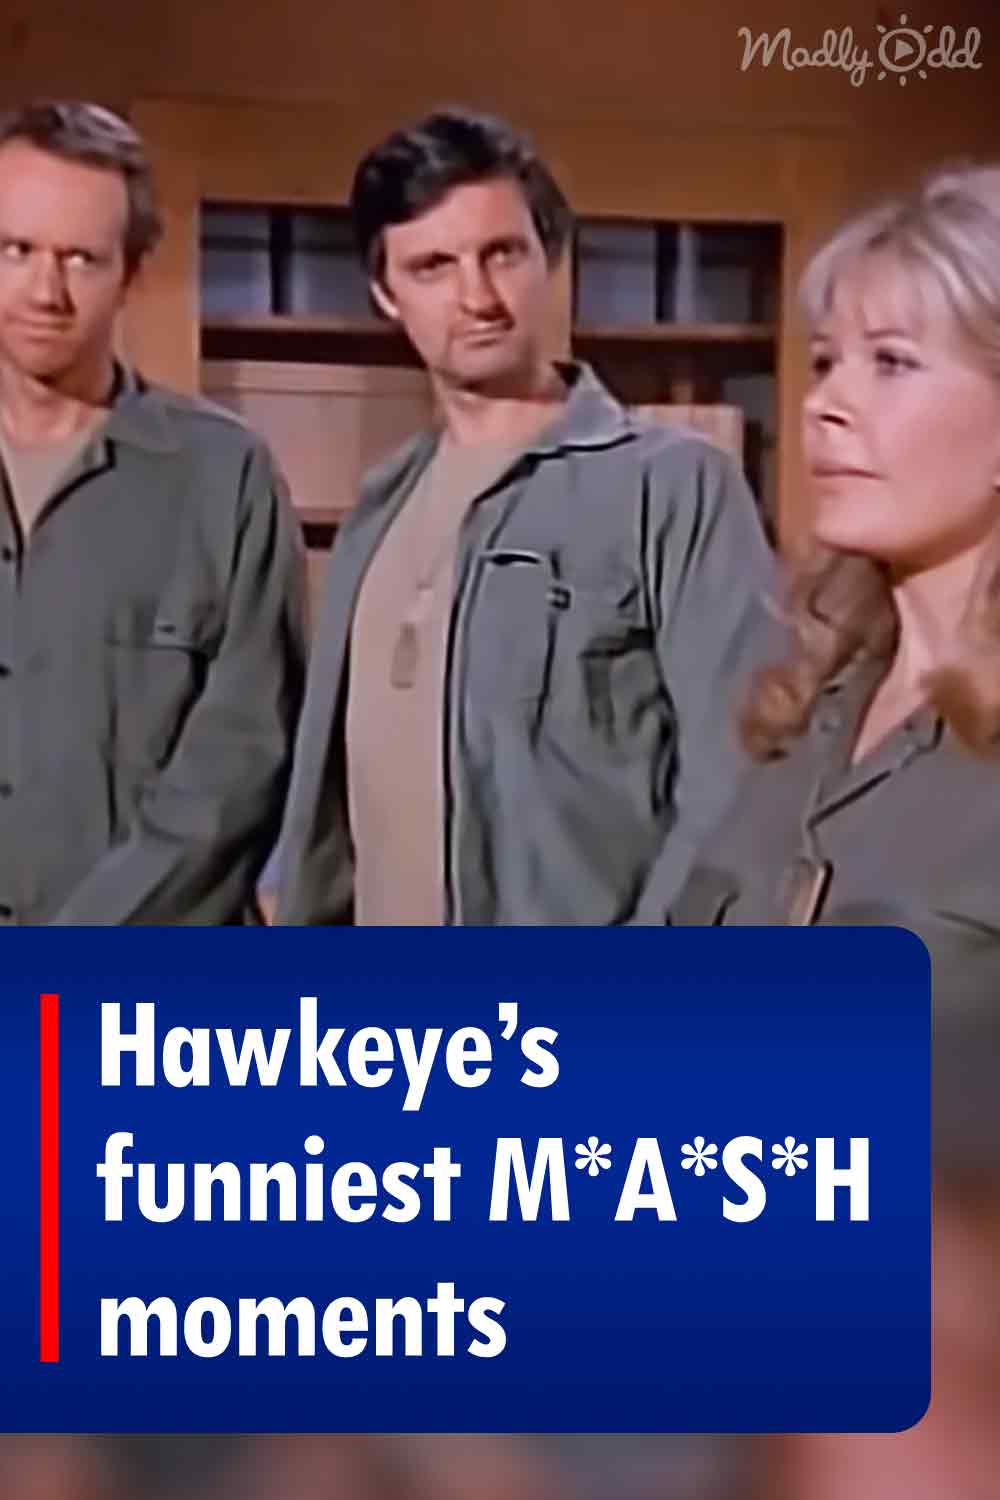 Hawkeye’s funniest M*A*S*H moments